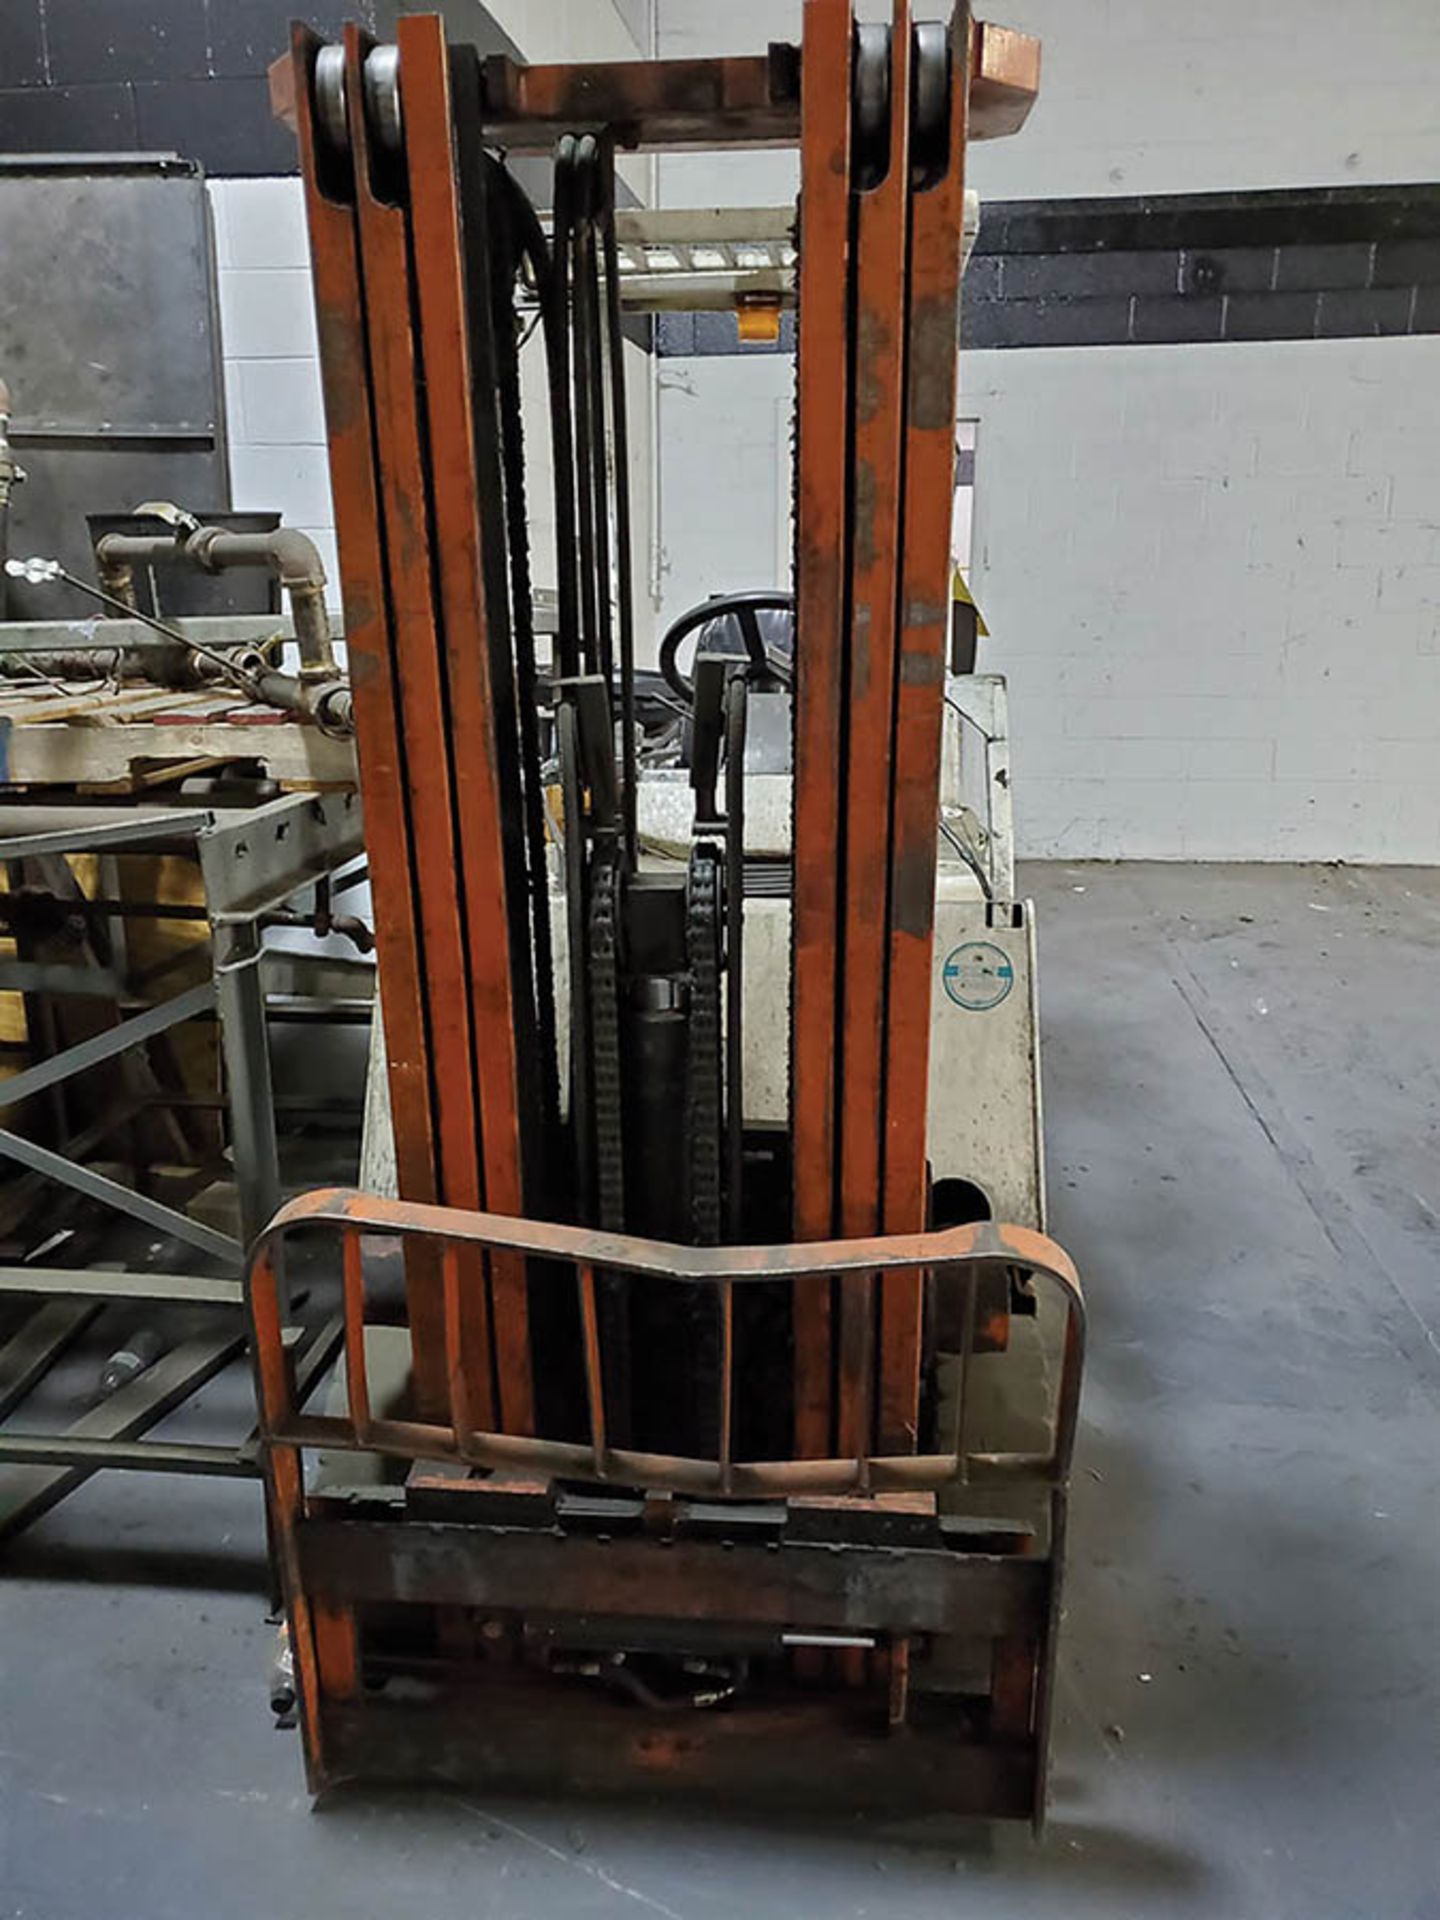 NISSAN 4,700 ELECTRIC FORKLIFT, 36V, SIDESHIFT, 3 STAGE MAST, SOLID TIRES (NEEDS REPAIR) - Image 4 of 6